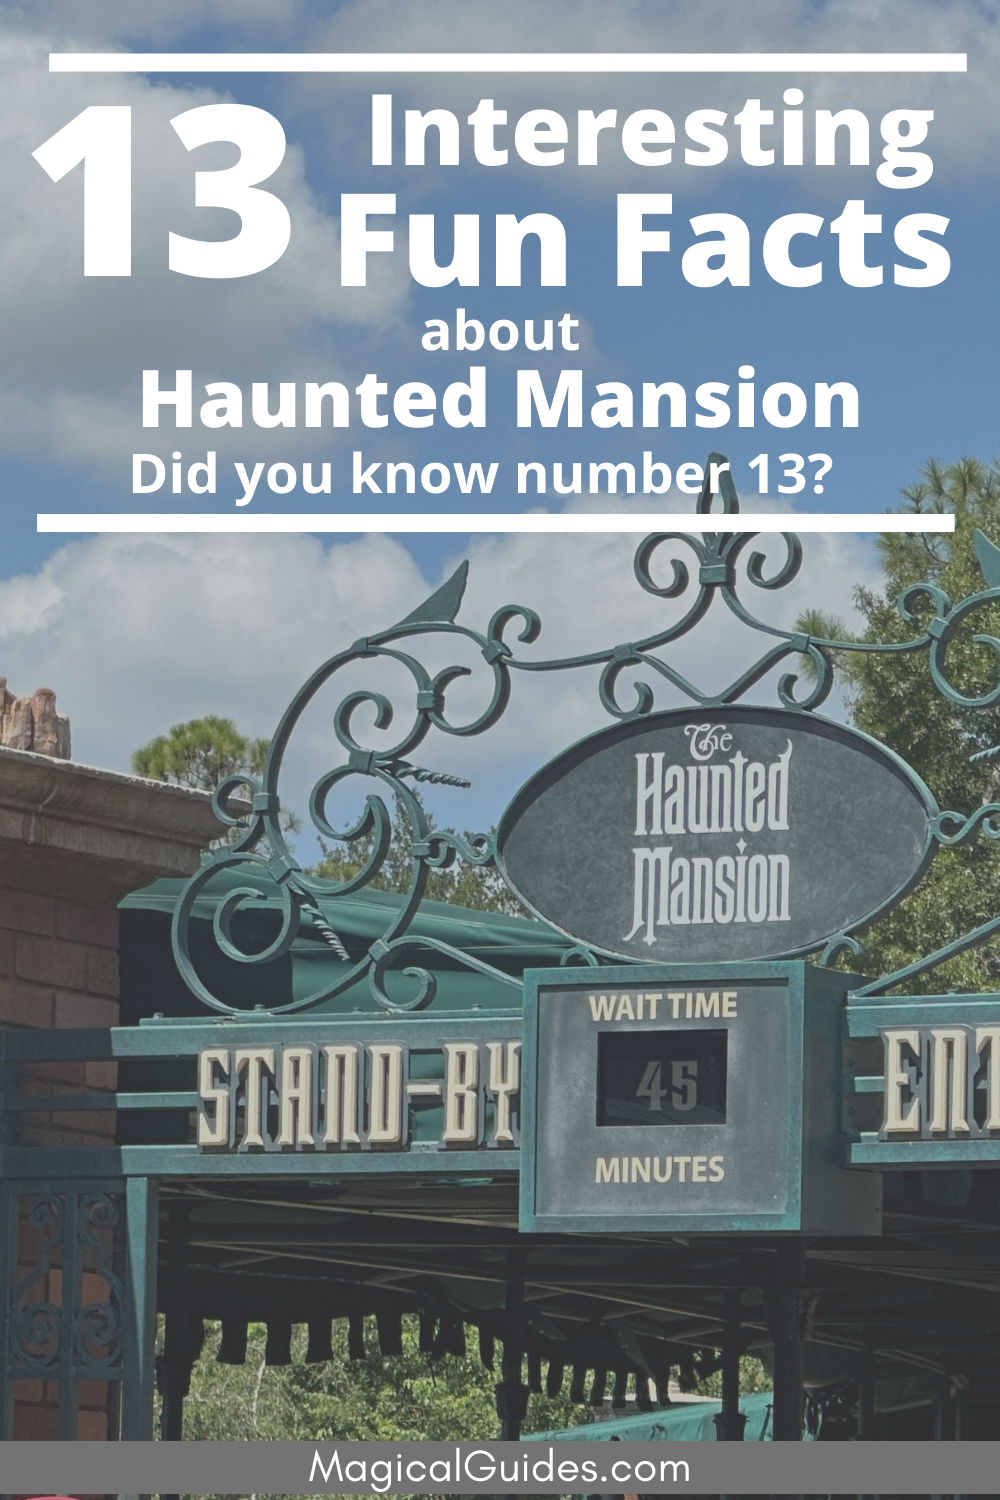 The Haunted Mansion ride is a fan favorite at Walt Disney World. Check out these 13 spooky facts you will love about the Haunted Mansion.